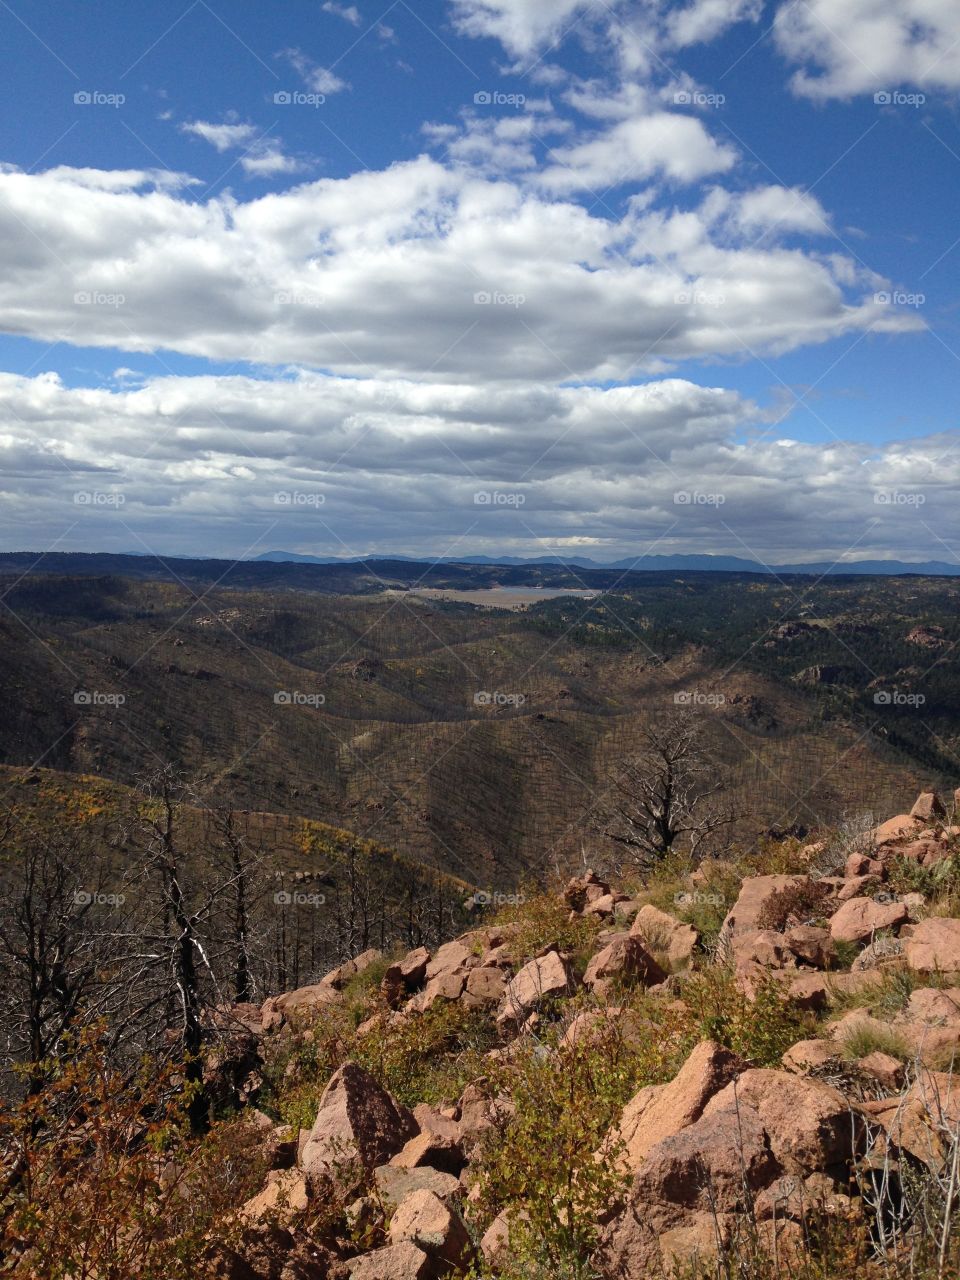 Rampart reservoir from top of Blodgett peak with Waldo Canyon burn scars